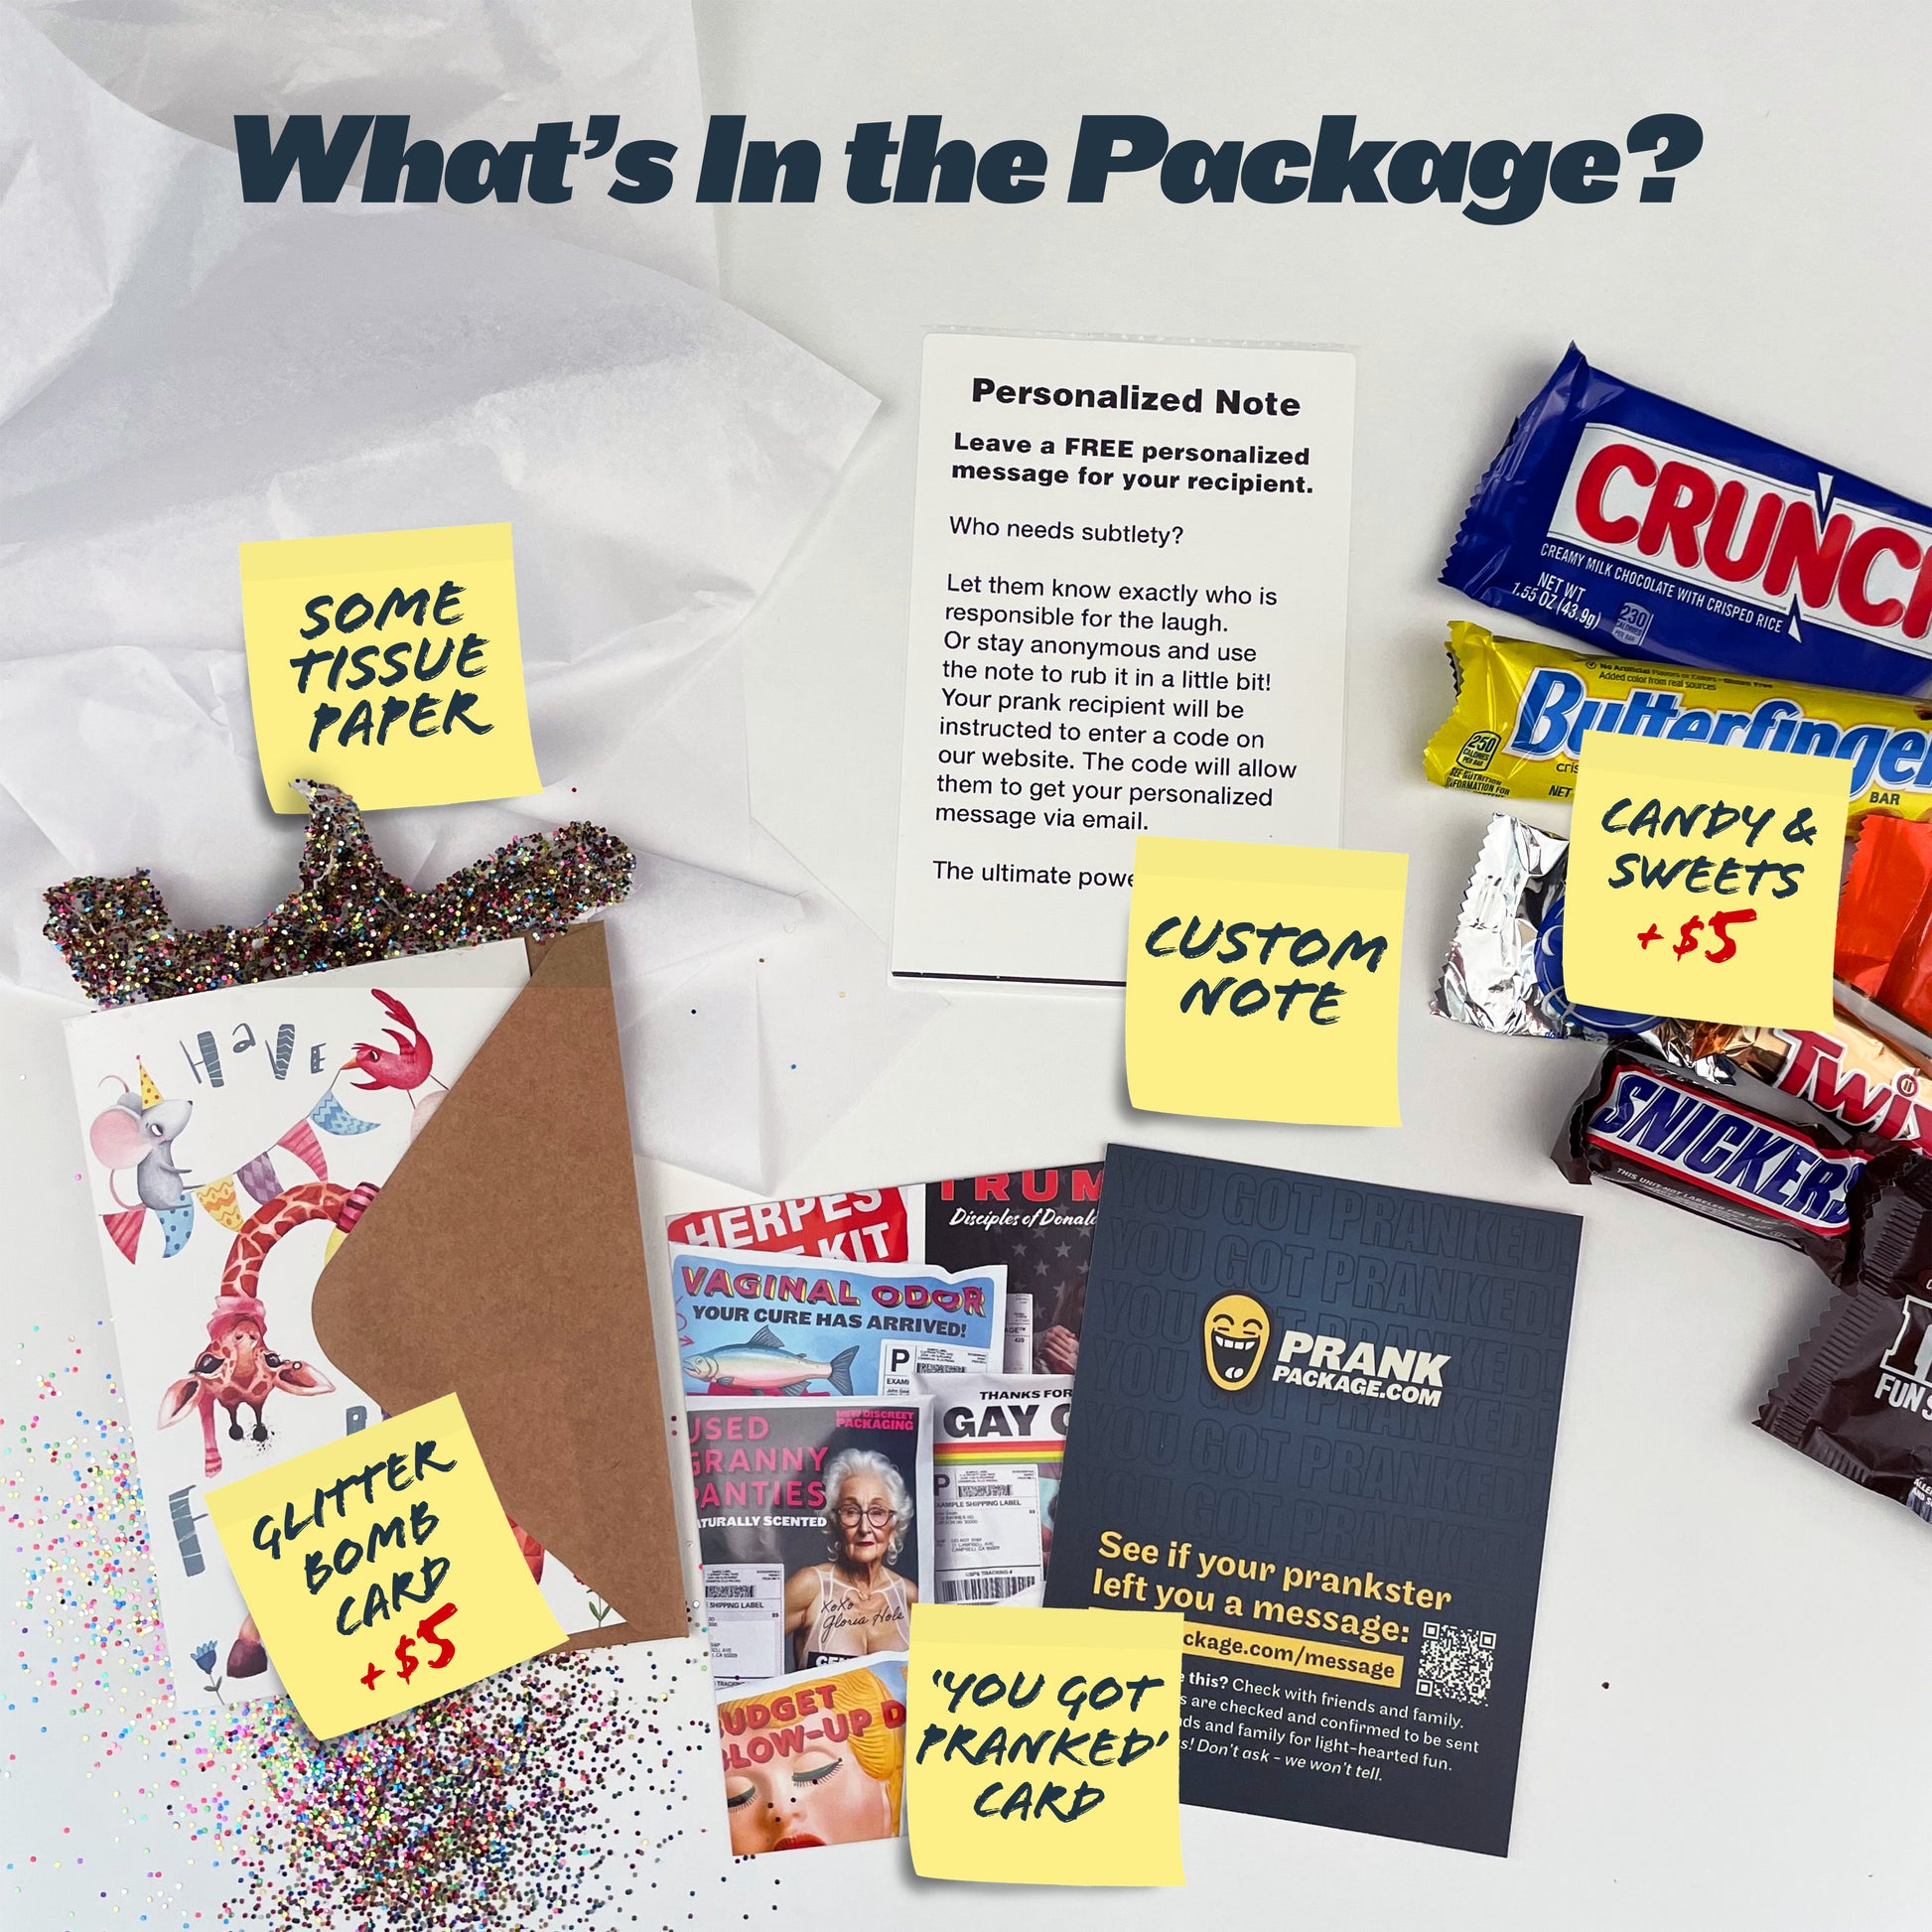 Items included in the Biden Prank Package shown on a white background: tissue paper, an optional glitter bomb greeting card, a personalized note, optional candy, and a 'You Got Pranked!' card.